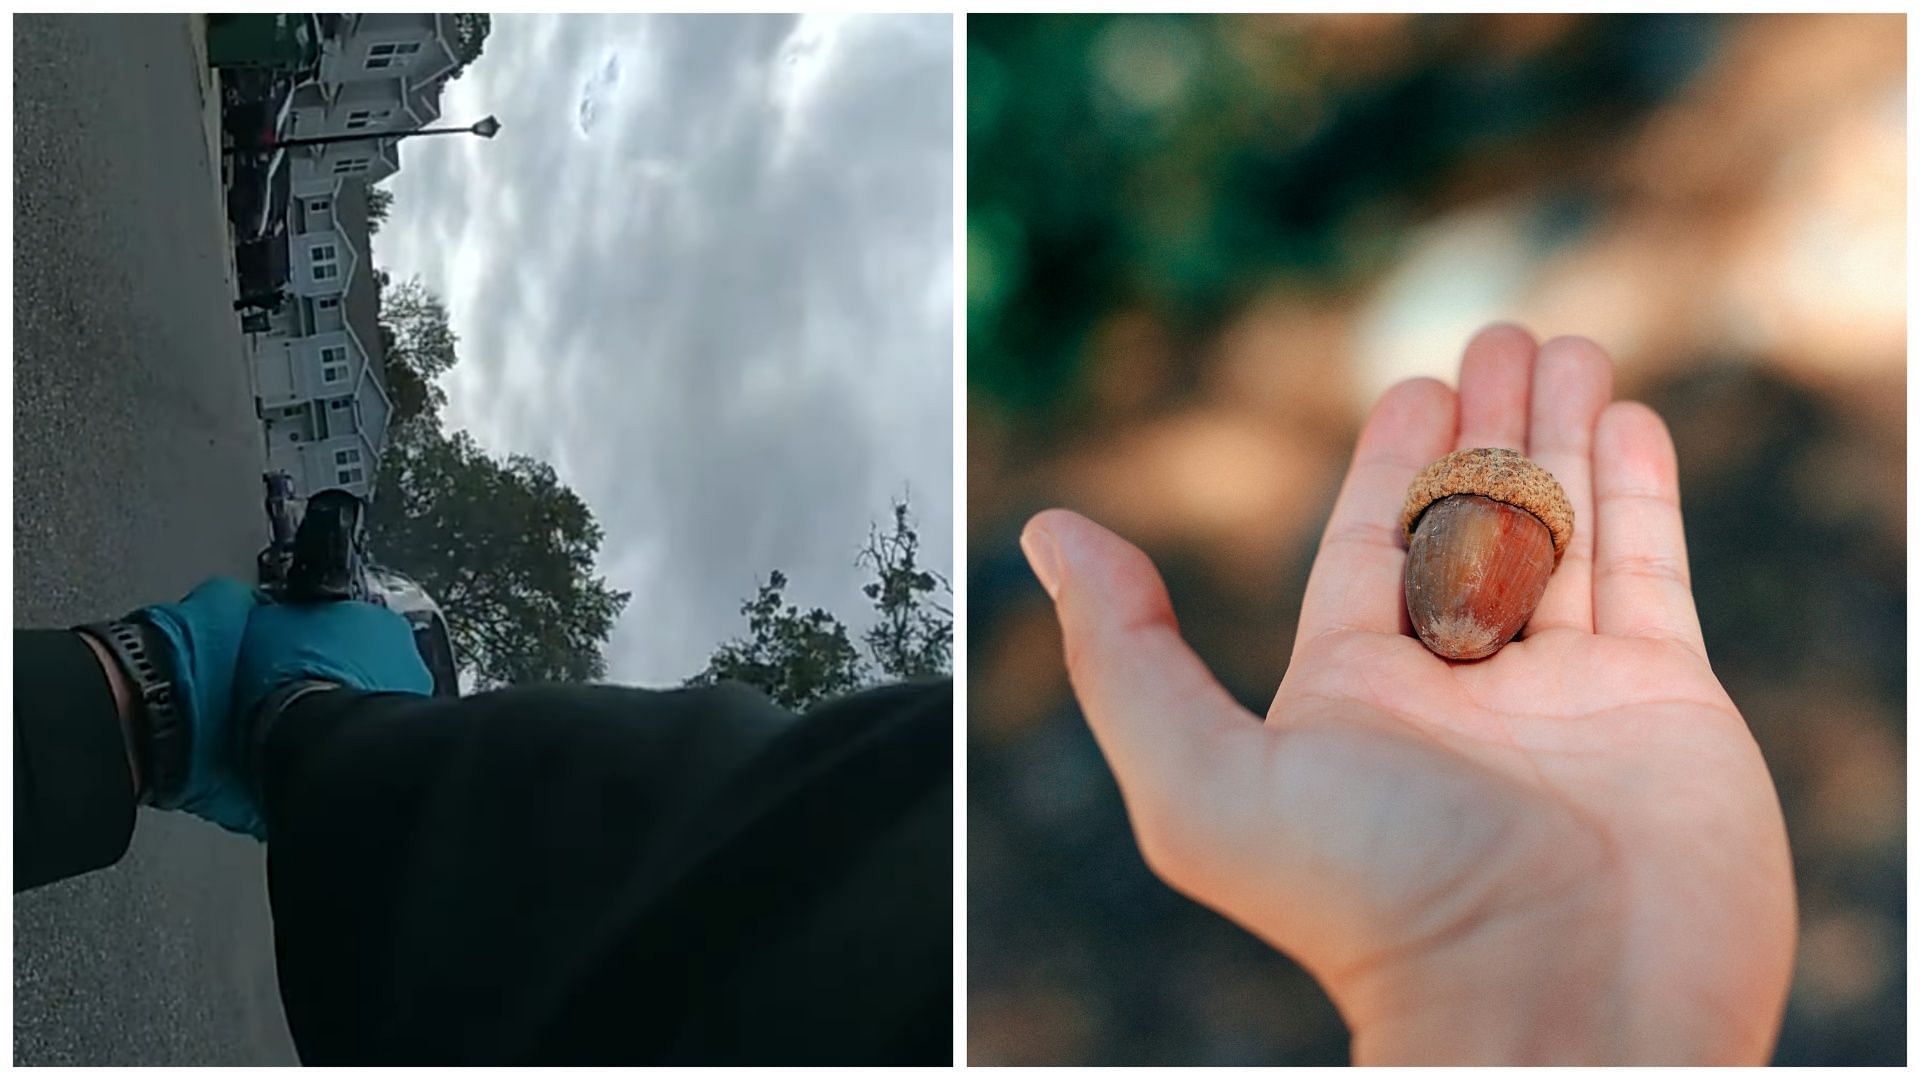 Netizens left stunned by video of Florida opening gun fire on handcuffed suspect after confusing a falling acorn for gunfire (Image via YouTube/OkaloosaSheriff, Jose Hernandez-Uribe on Unsplash)